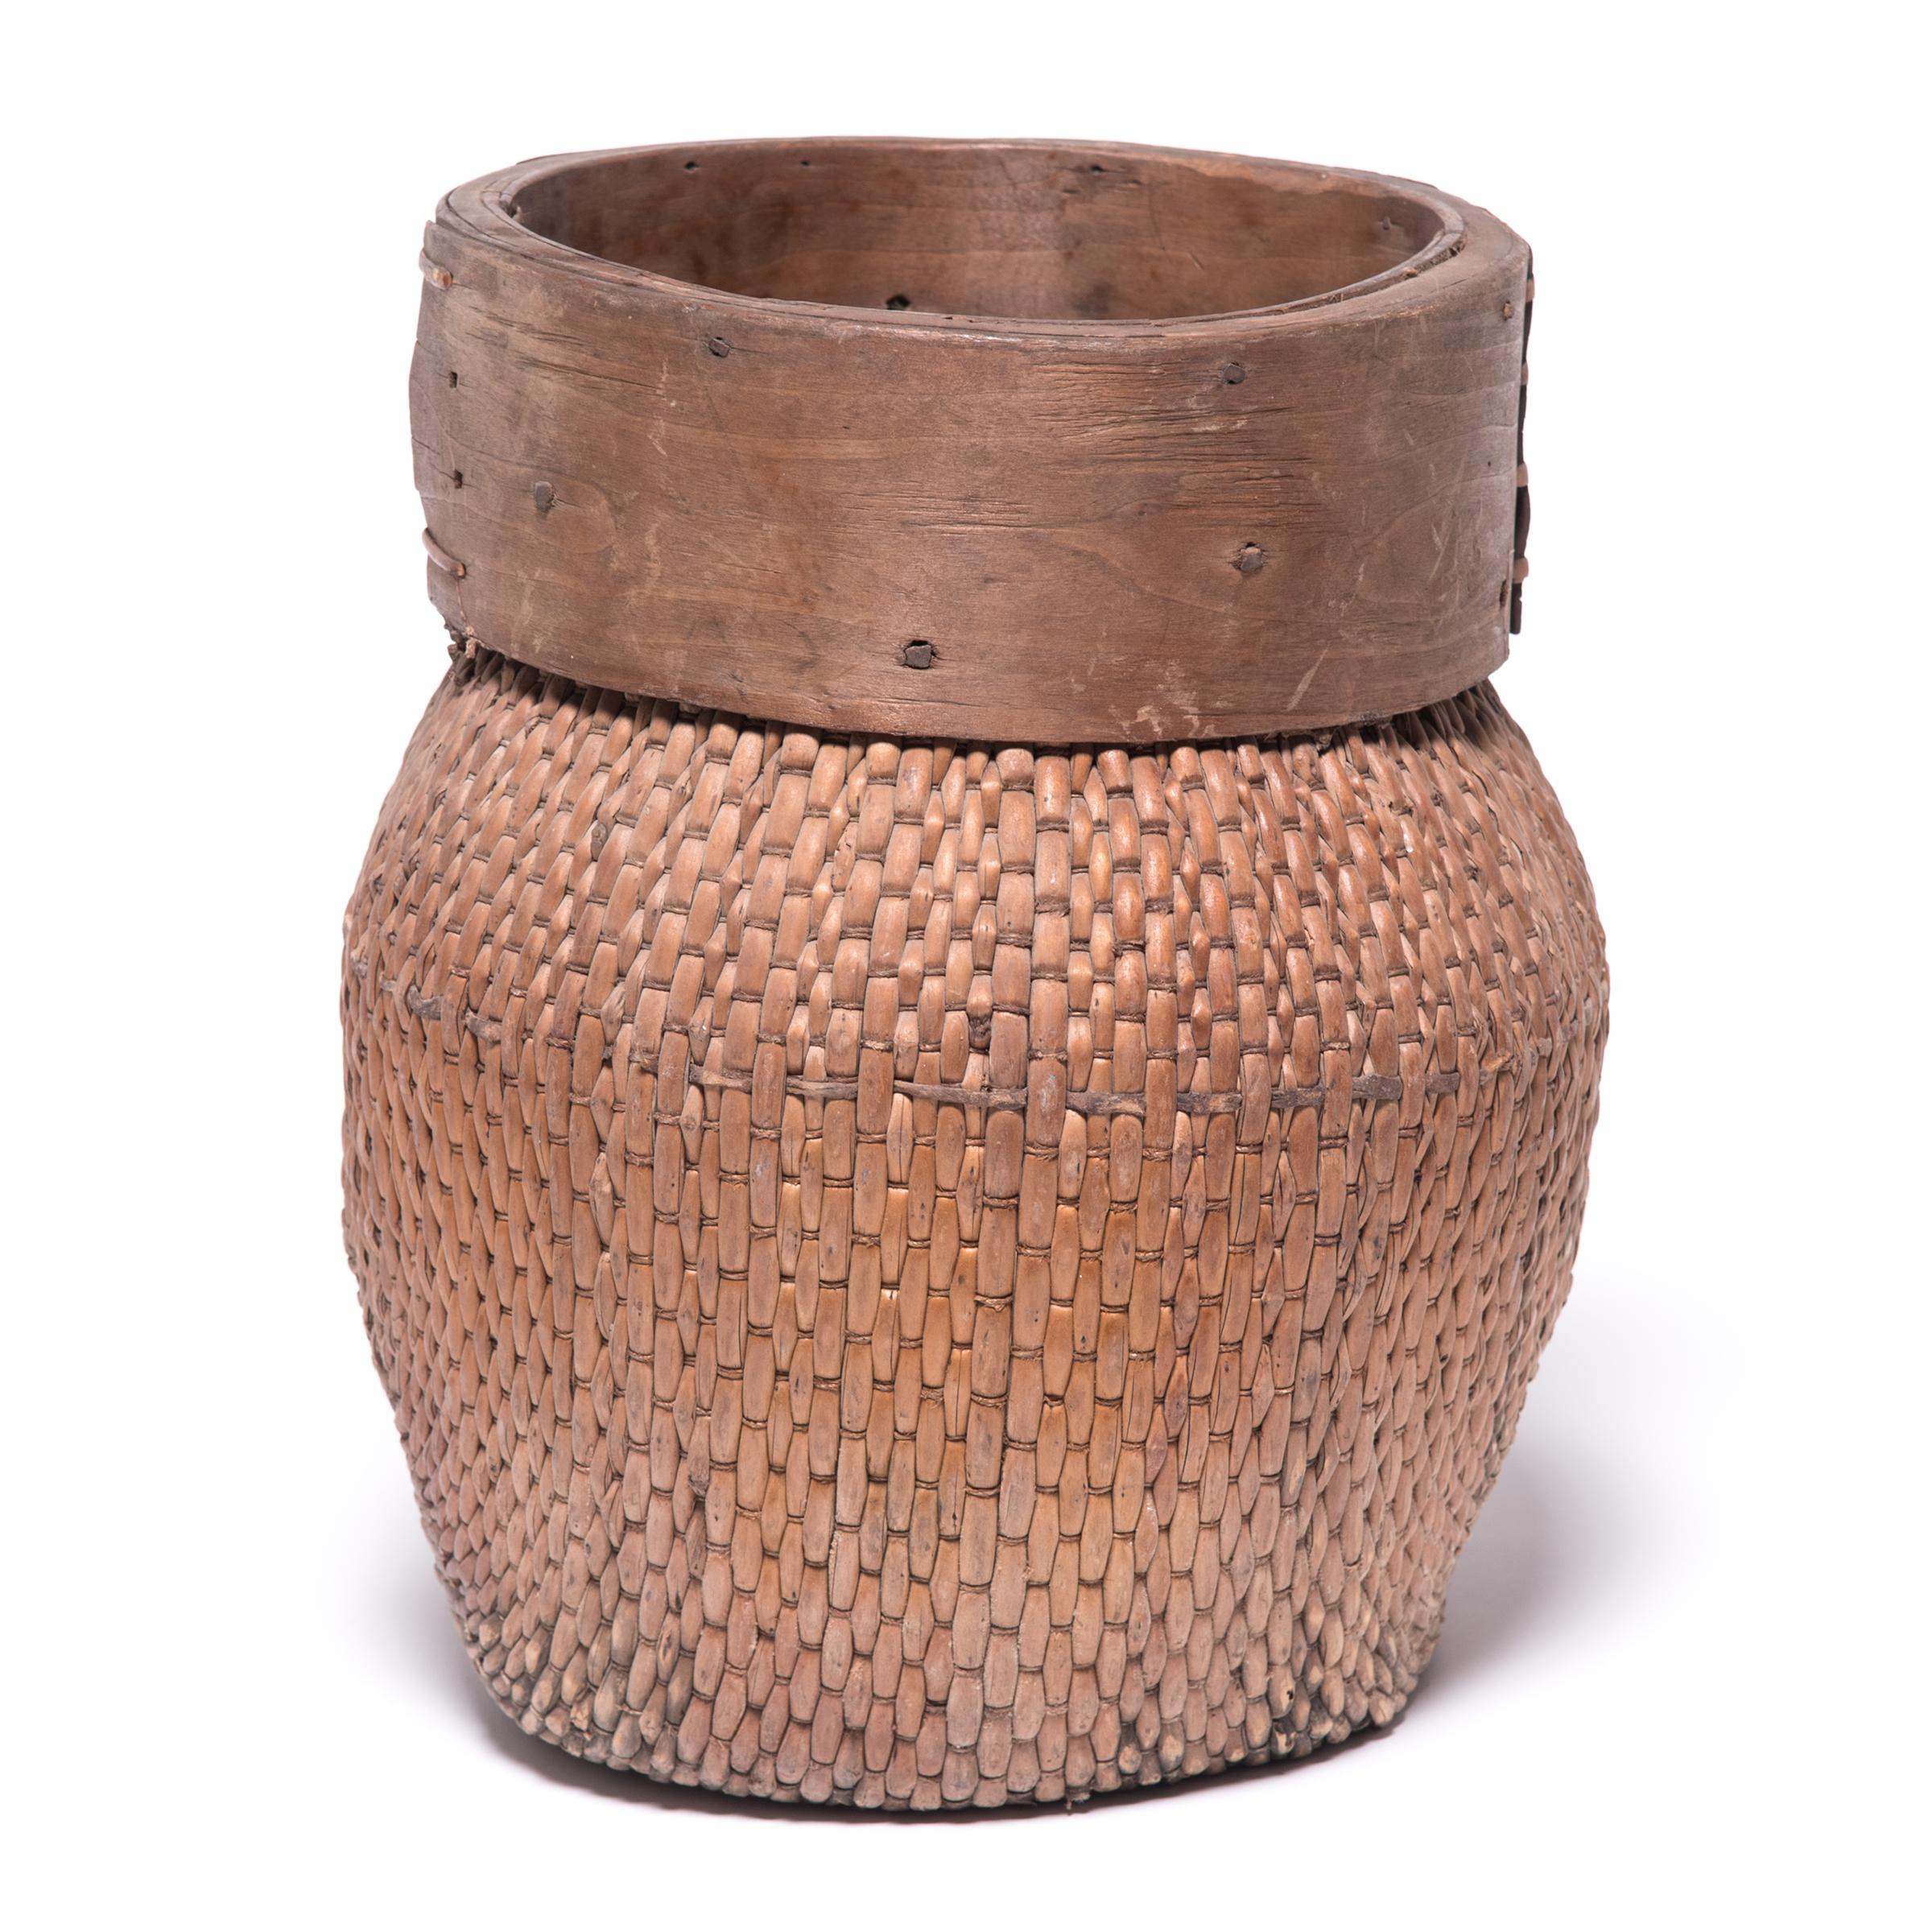 Centuries ago, a reed fisherman’s basket like this one would have been fairly common in rural China: an everyday item that would have been used until it was worn through. This particular example remains in beautiful condition, and so a century